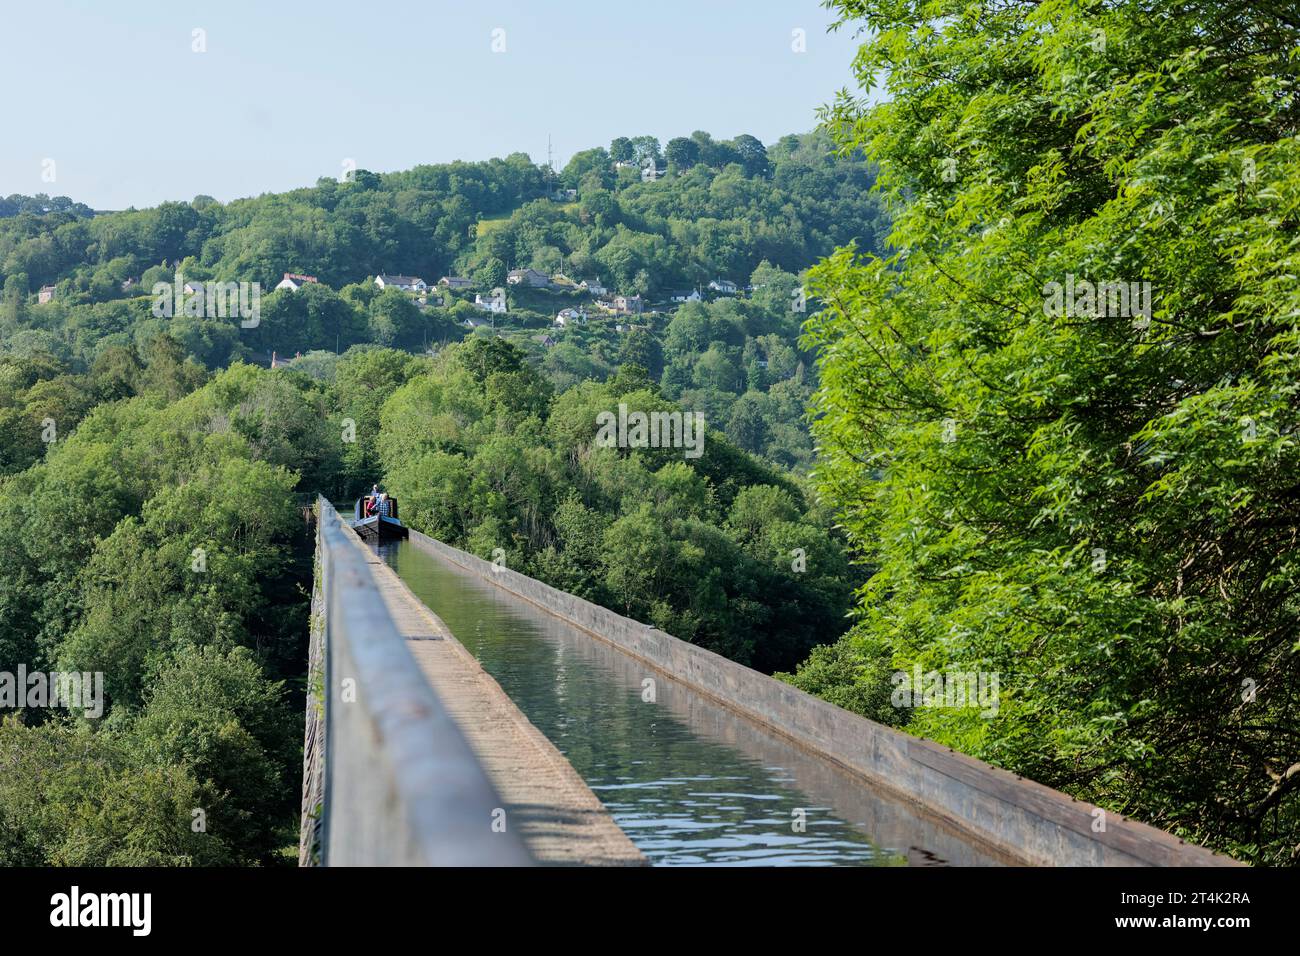 Canal boat on the Pontcysyllte Aqueduct over the Dee Valley, Llangollen Canal, Denbighshire, Wales Stock Photo